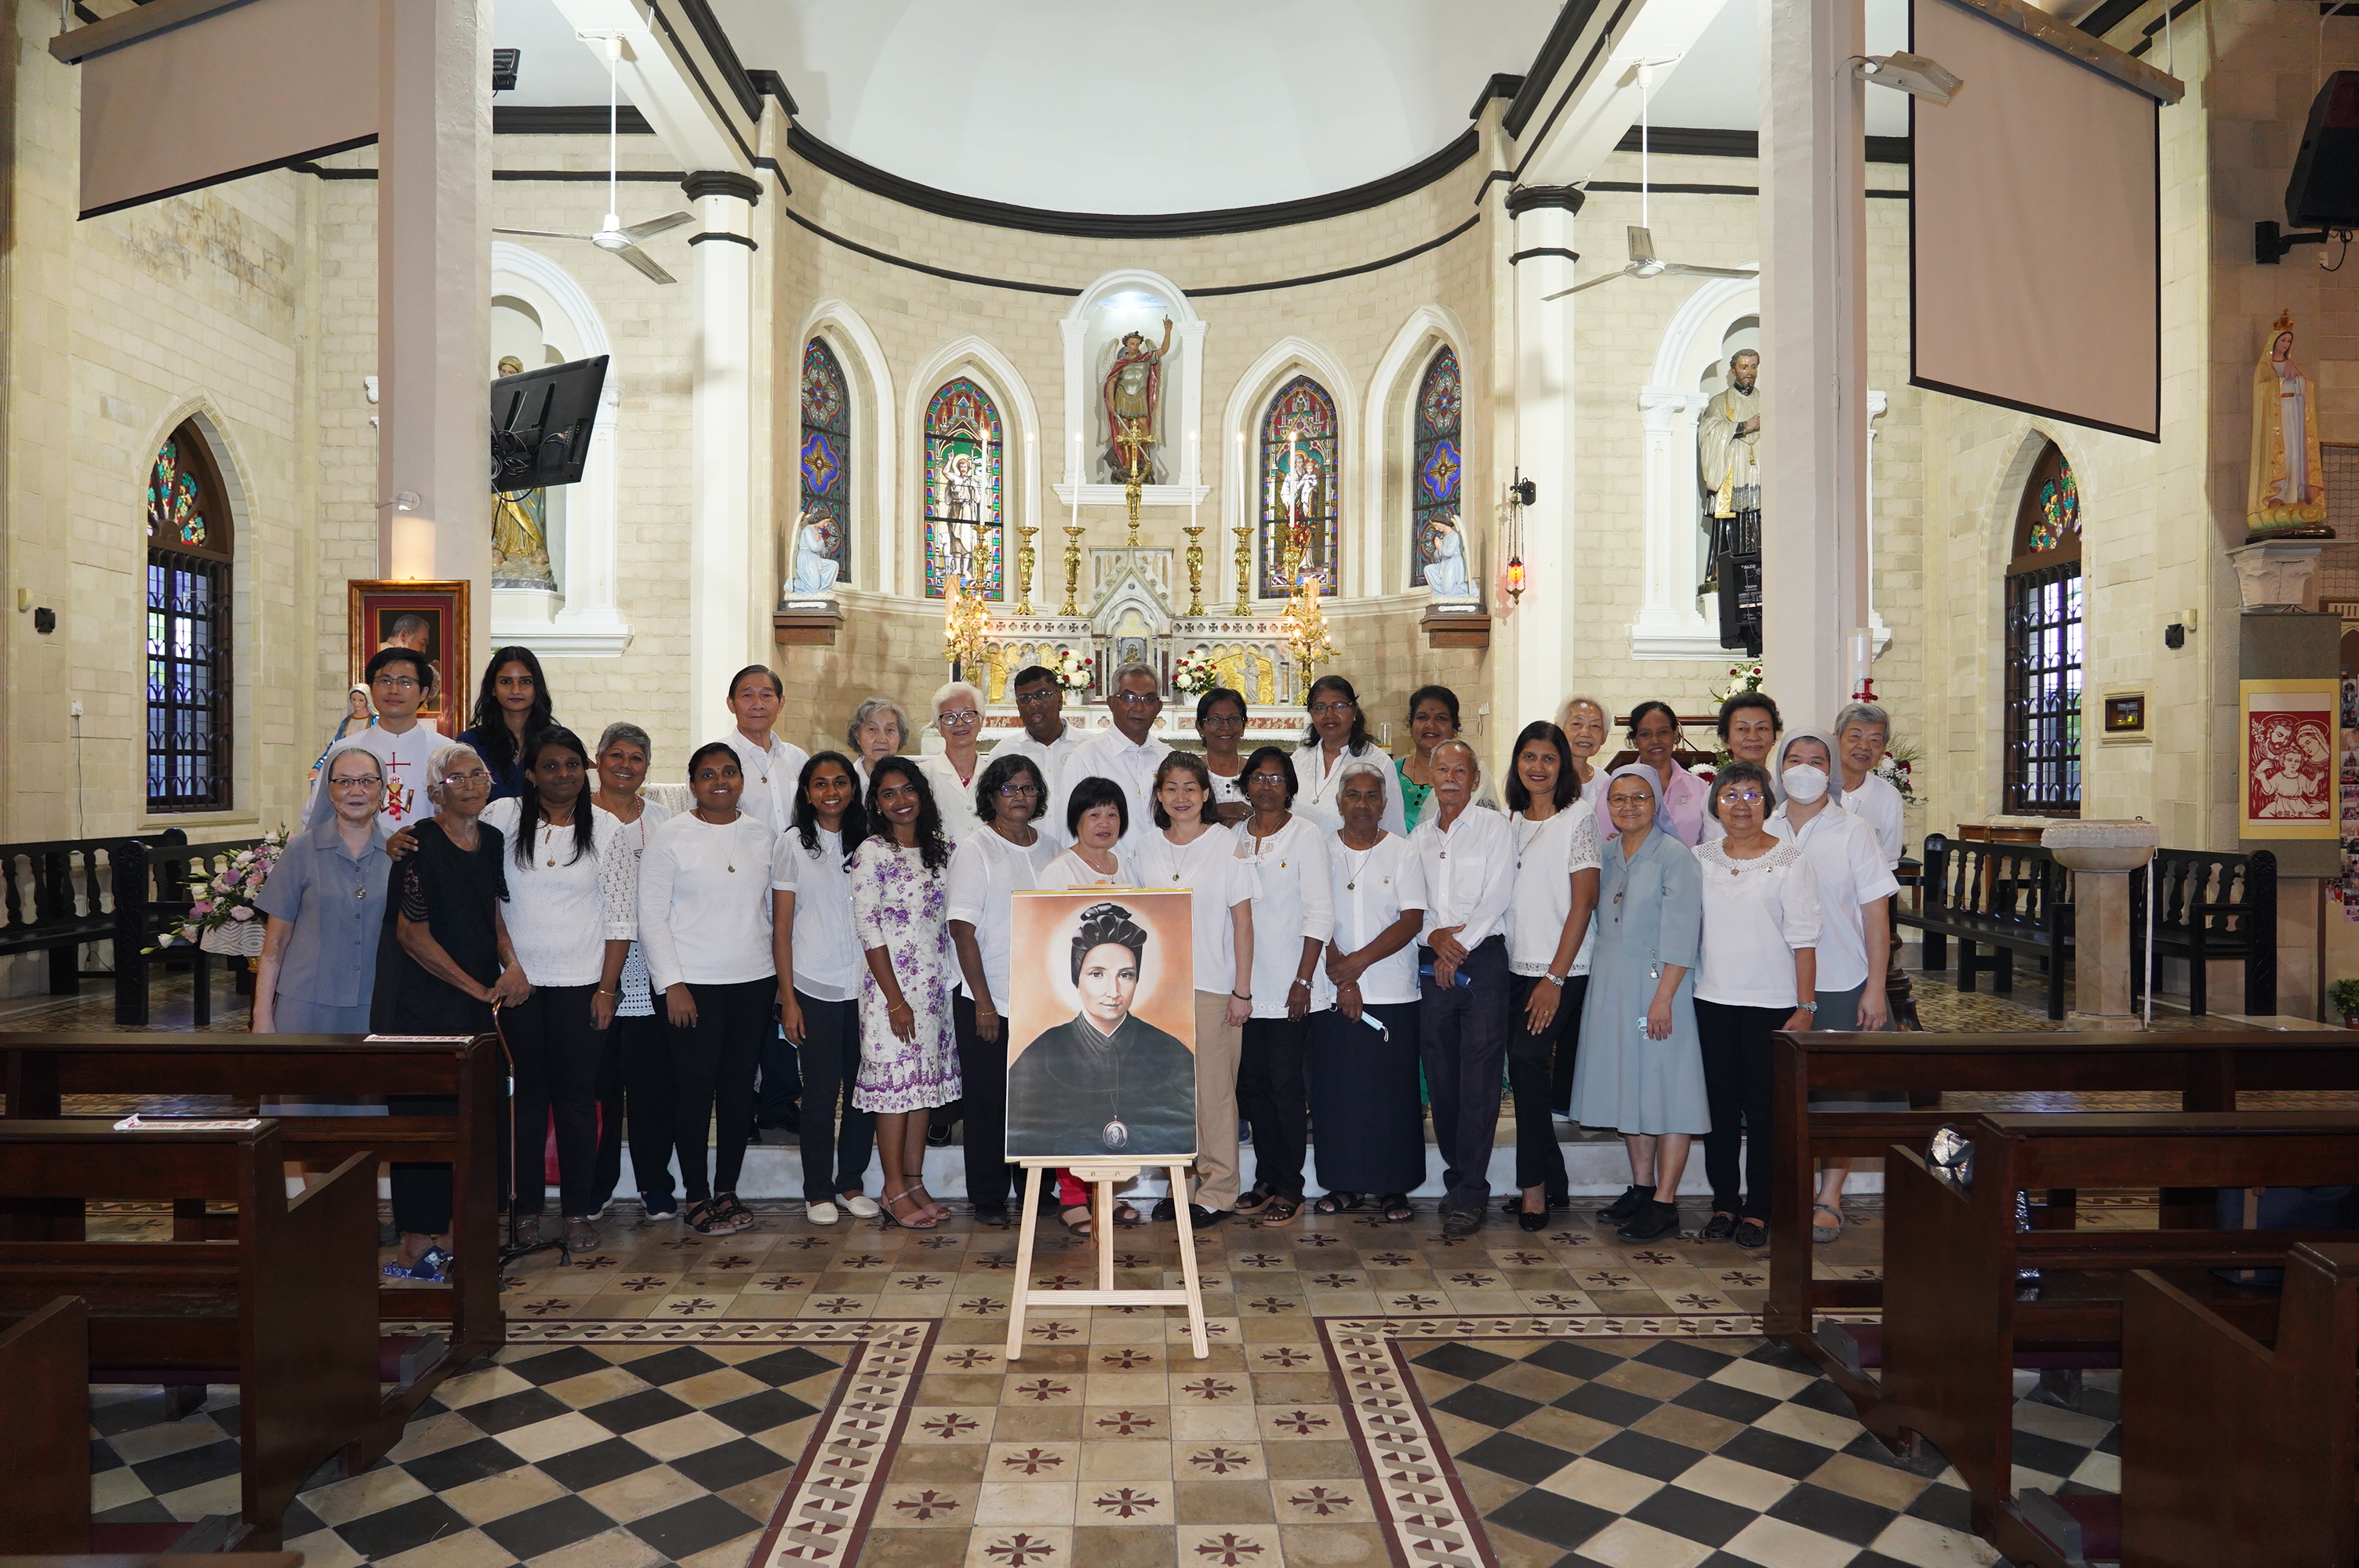 Group picture of Canossian Sisters with Lay Canossians and Fr Anthony Liew